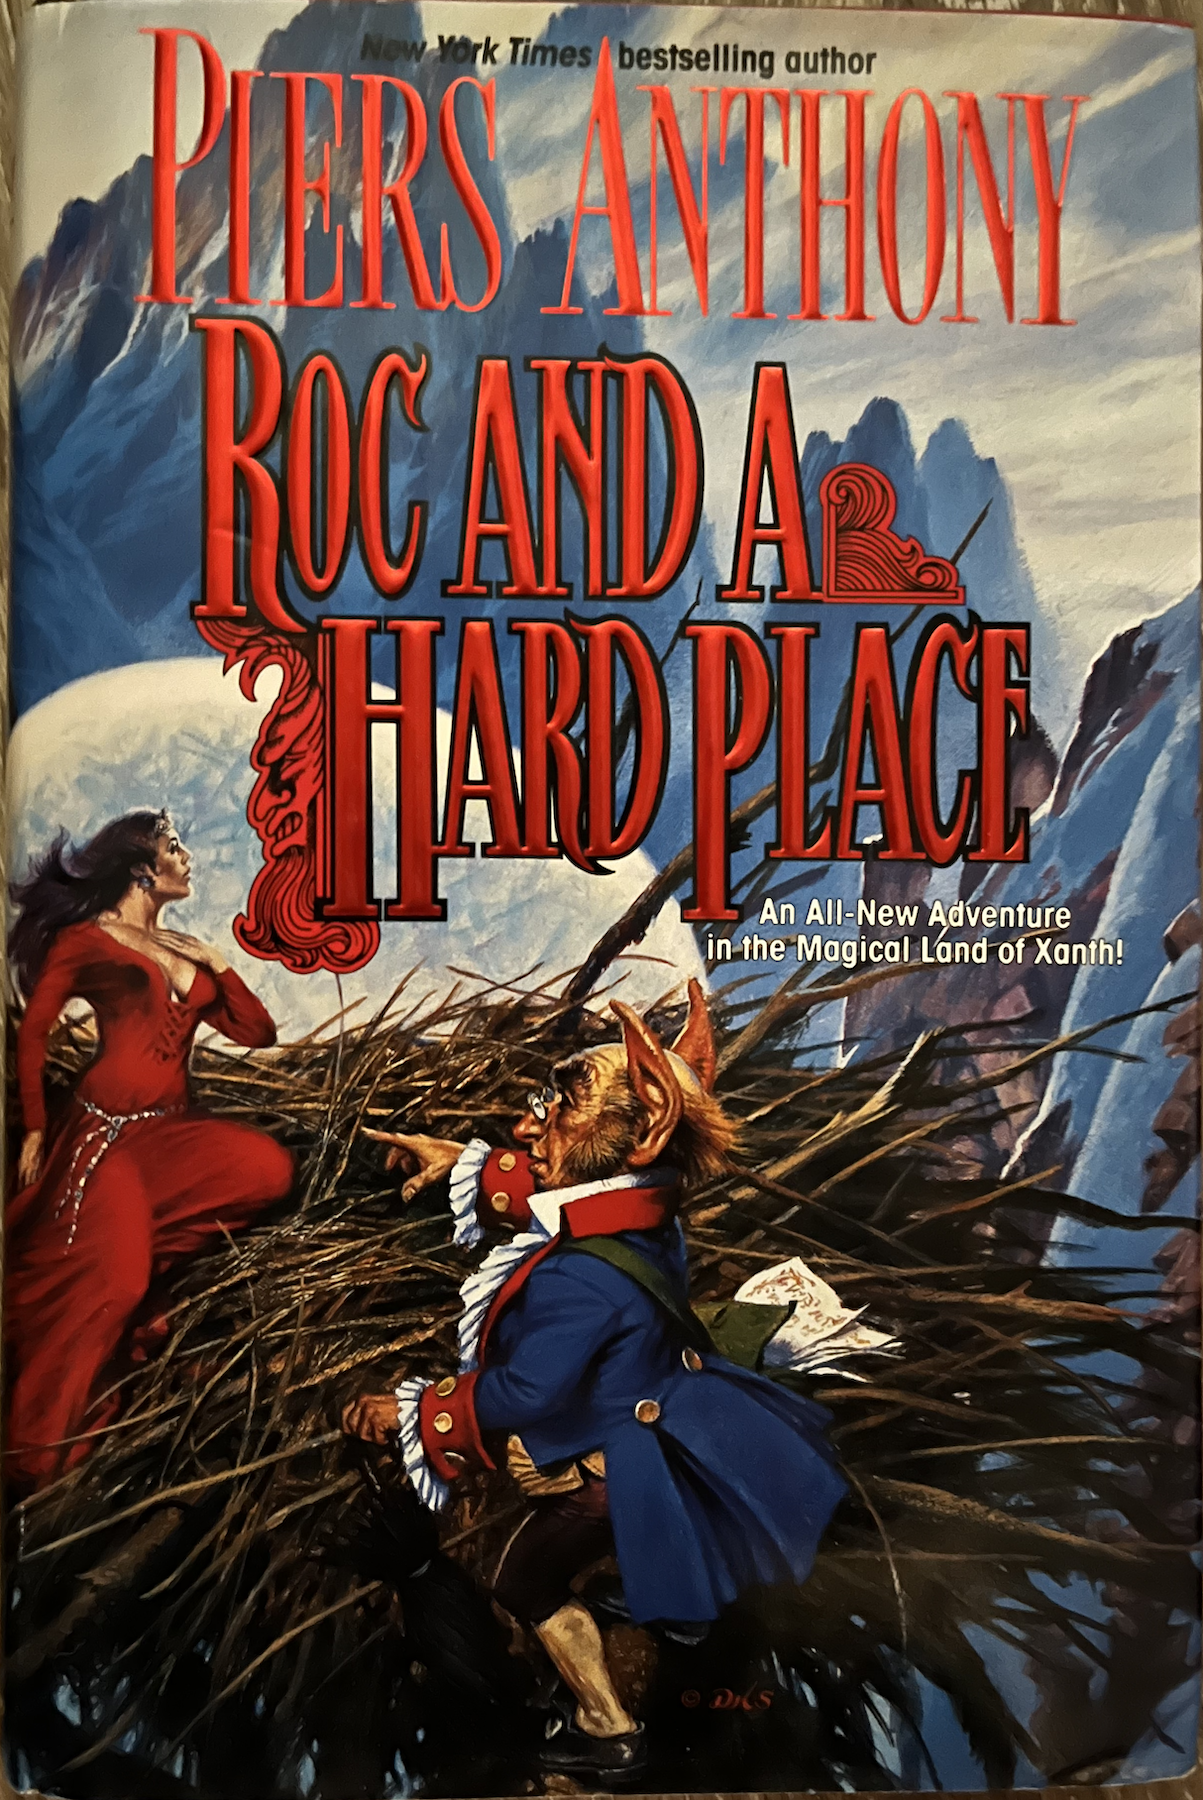 Roc and a Hard Place hardback cover